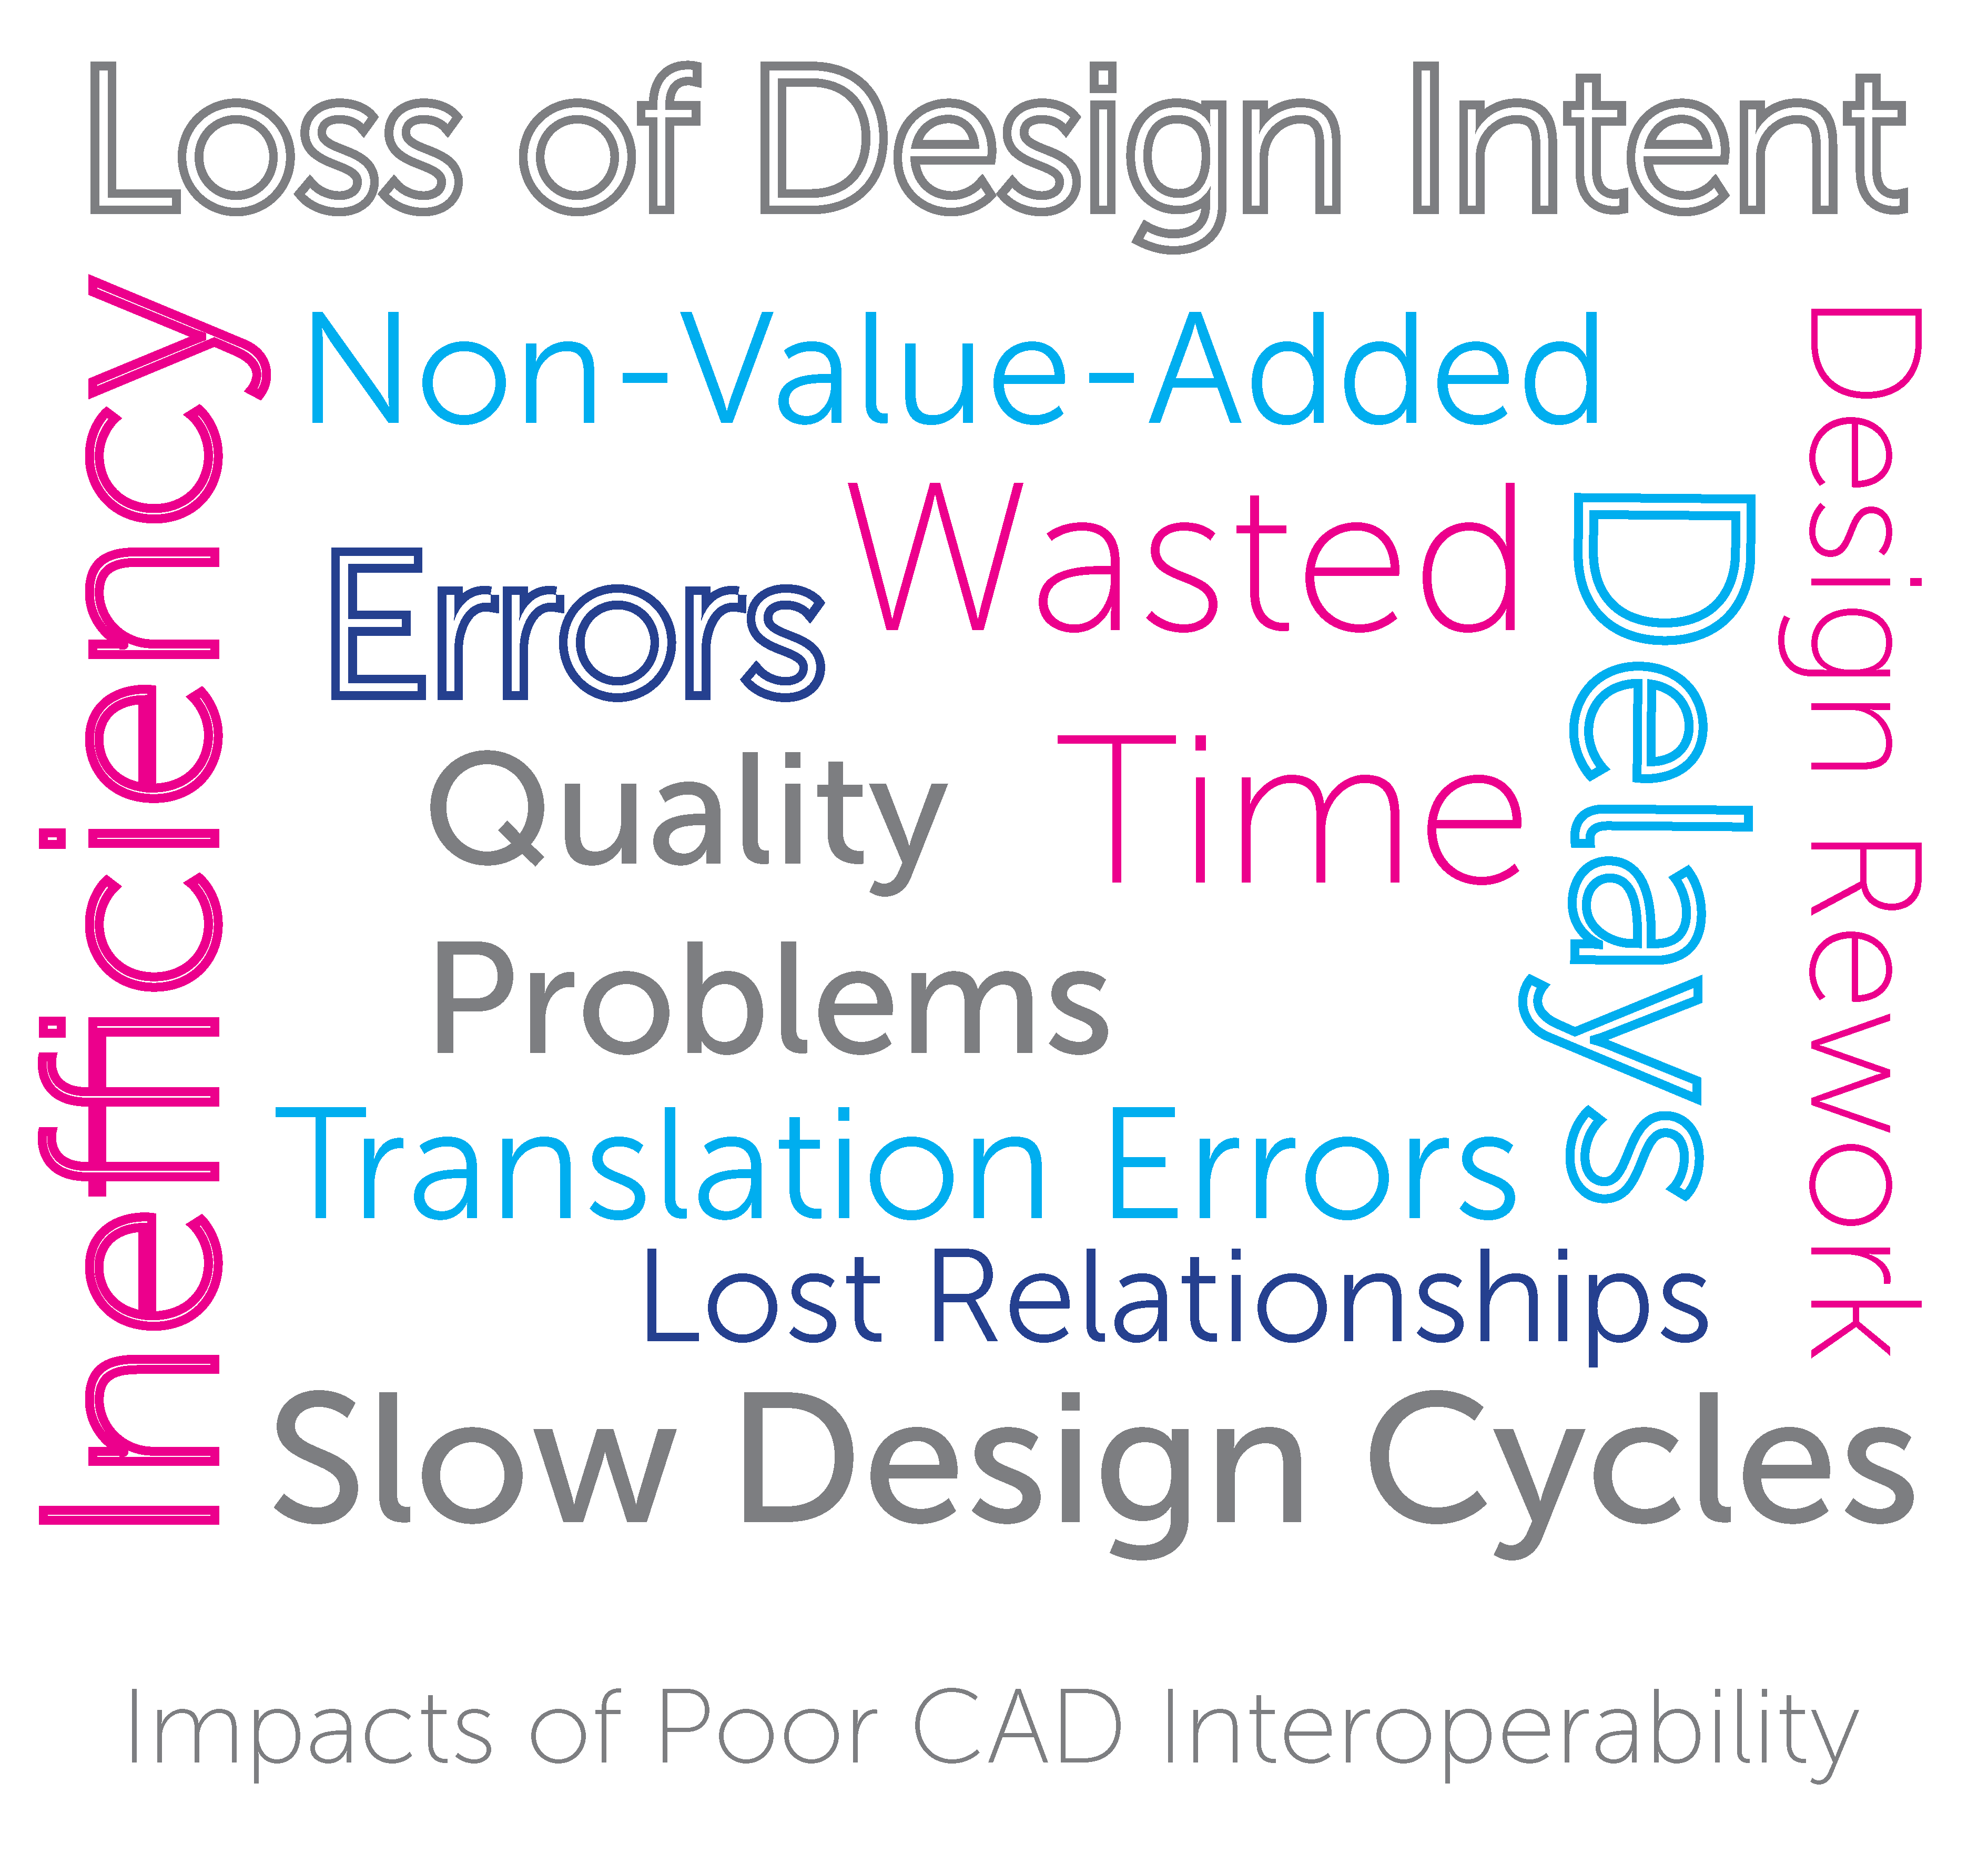 Download your Free CAD Interoperability Multi-CAD Guide from Tech Clarity